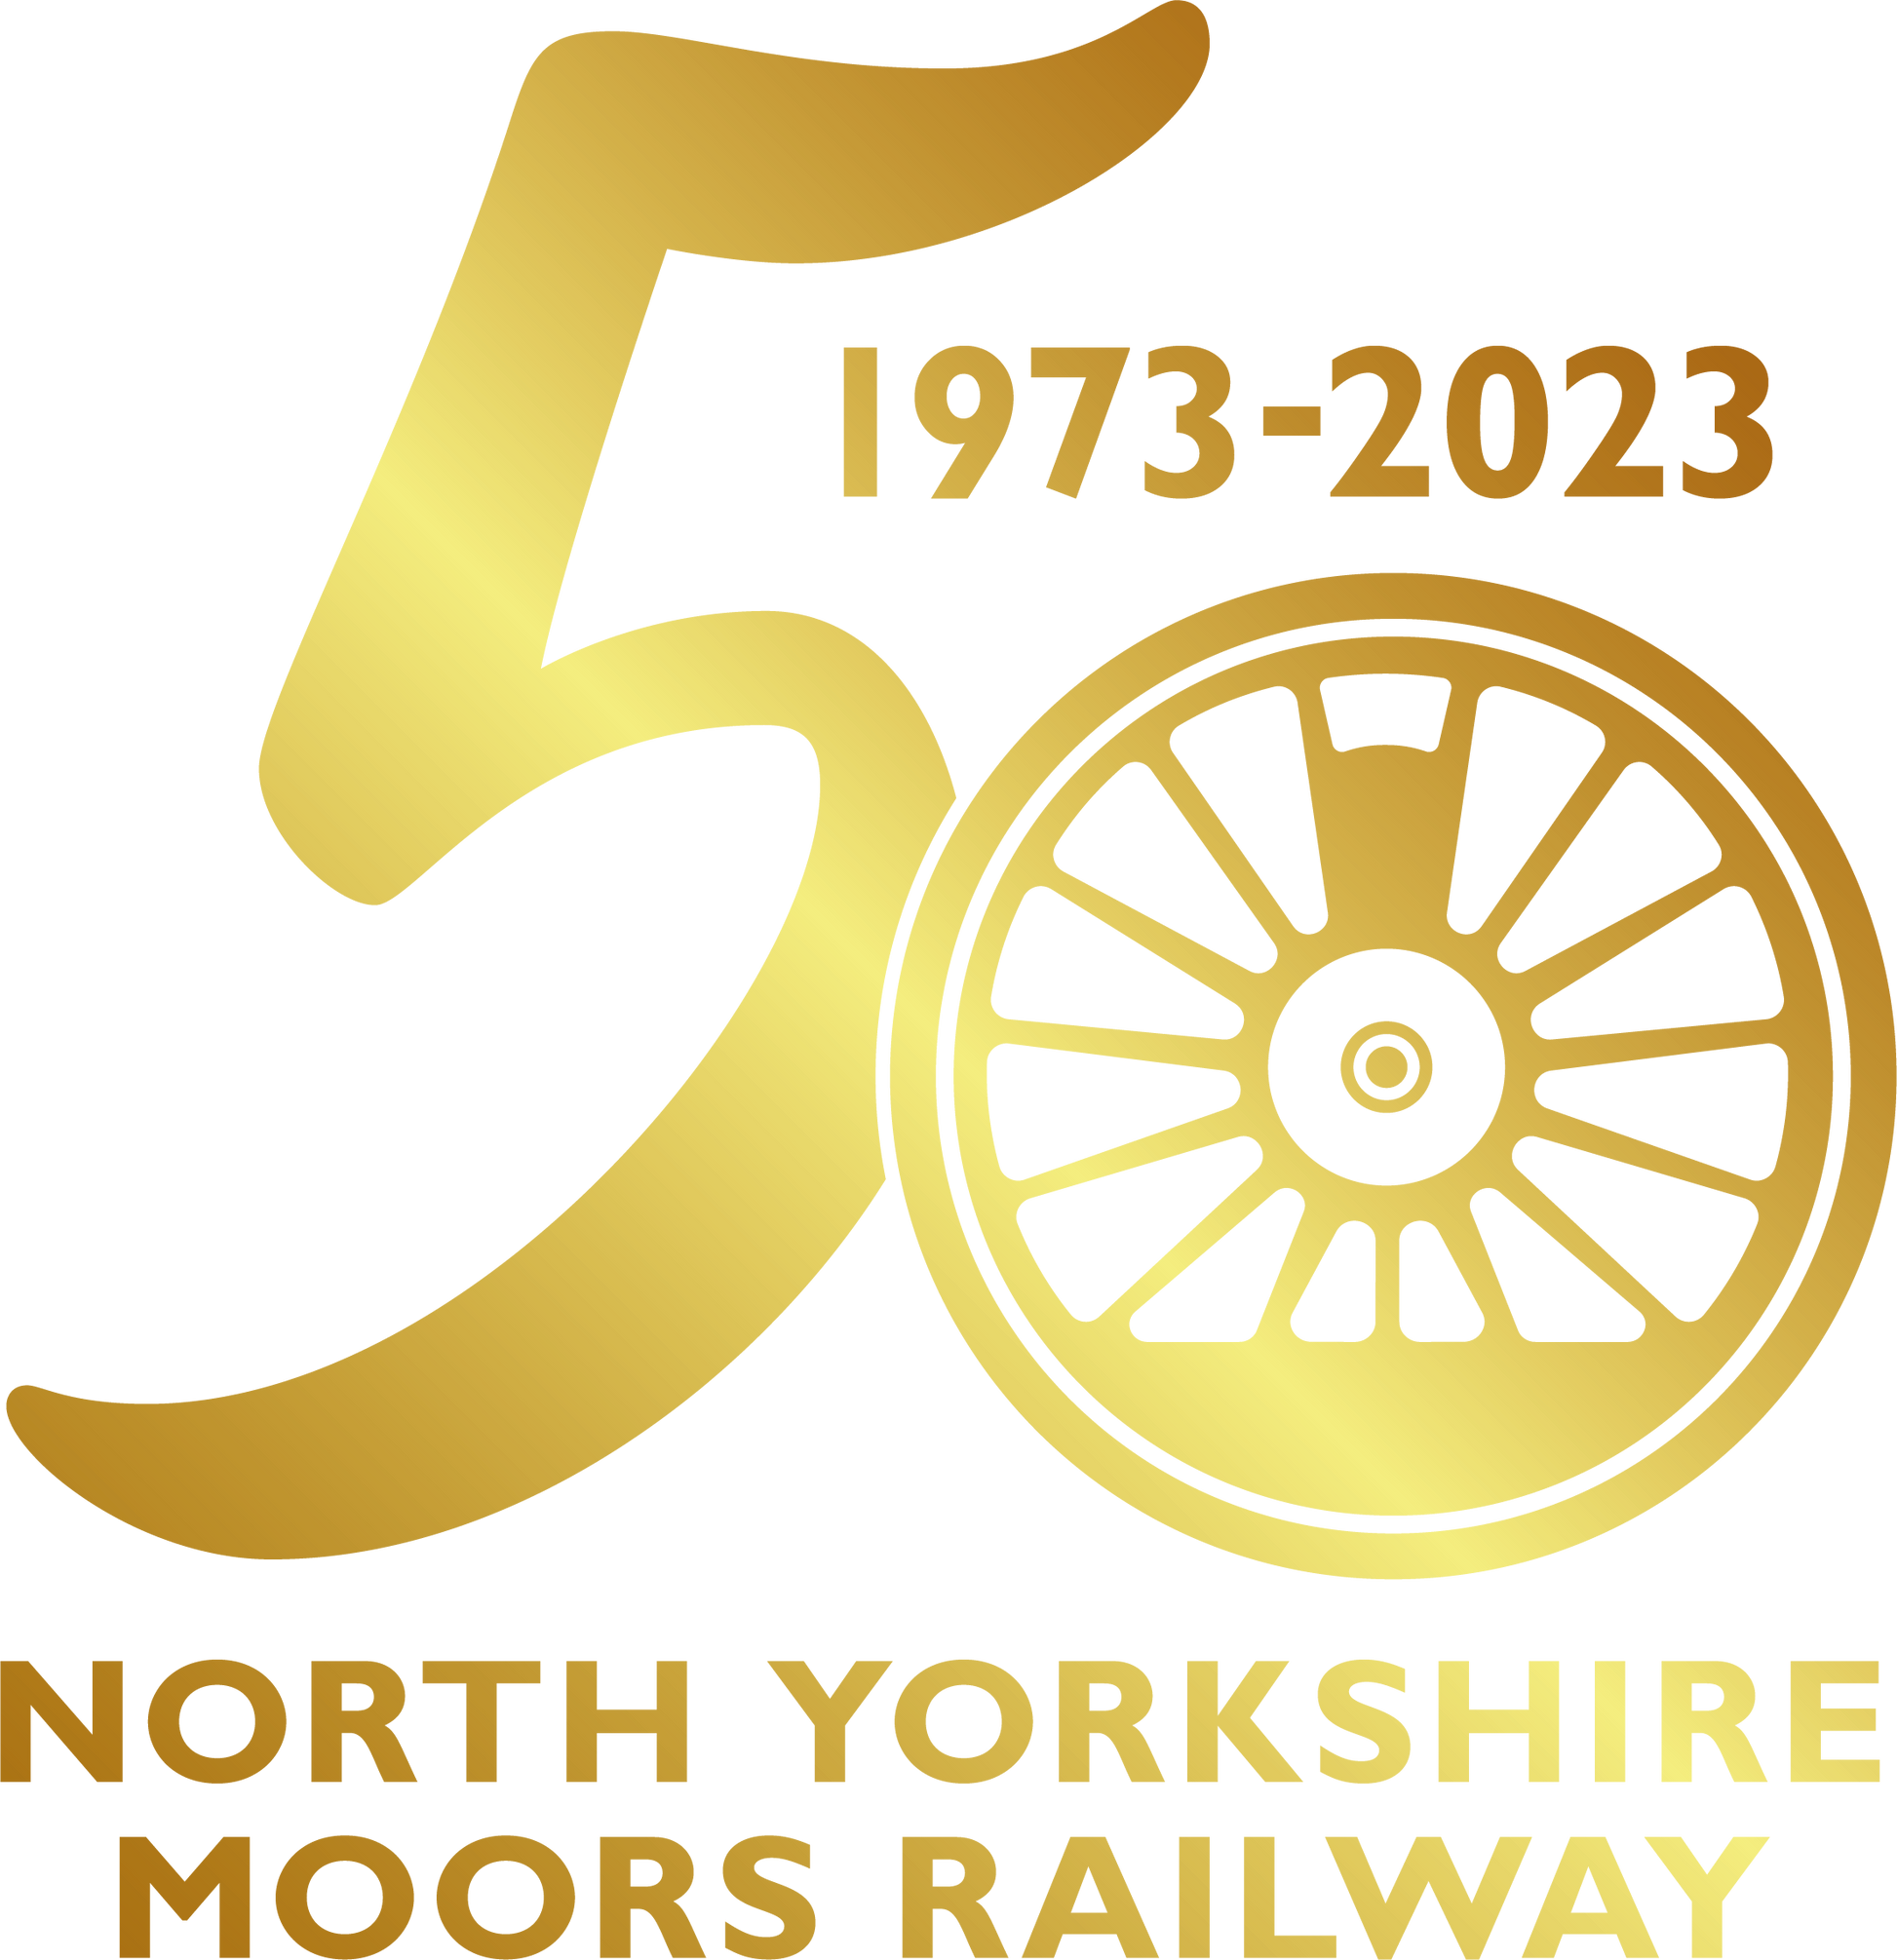 The 50th anniversary logo showing 1973 - 2023